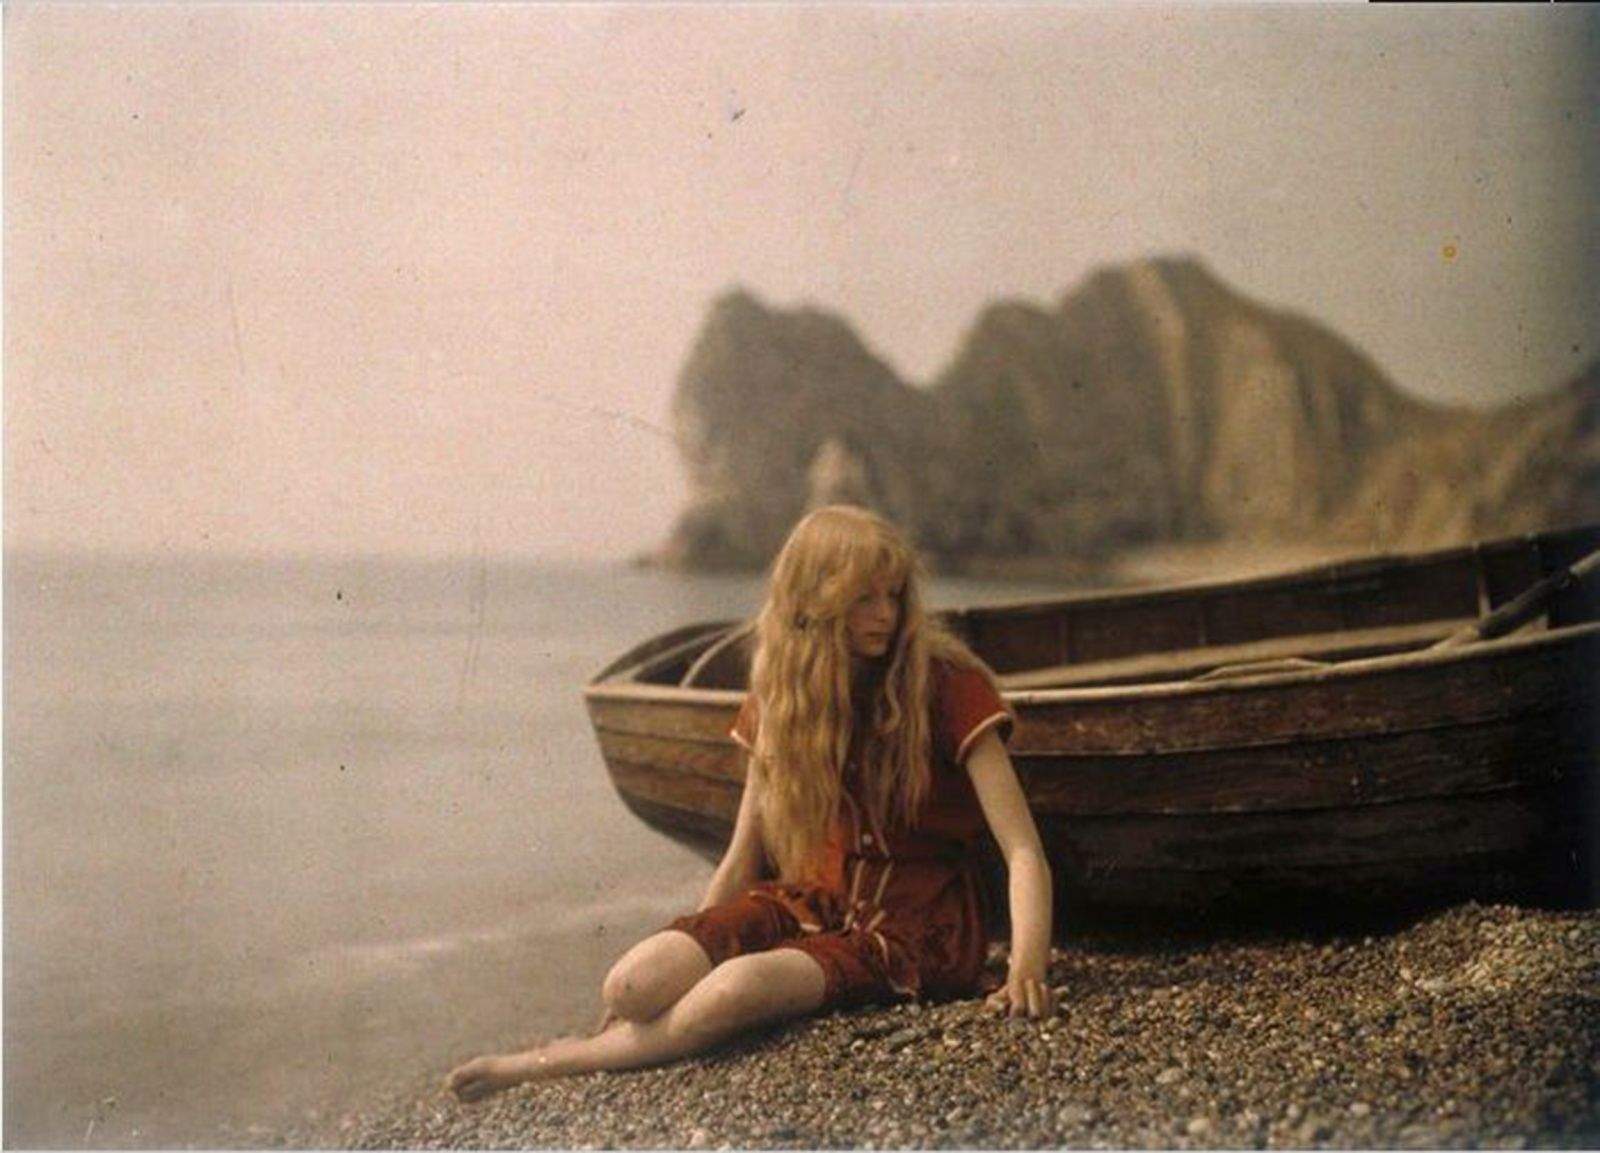 This photograph was made in the early 1900s using the Autochrome process, which starts with dyed potato starch.